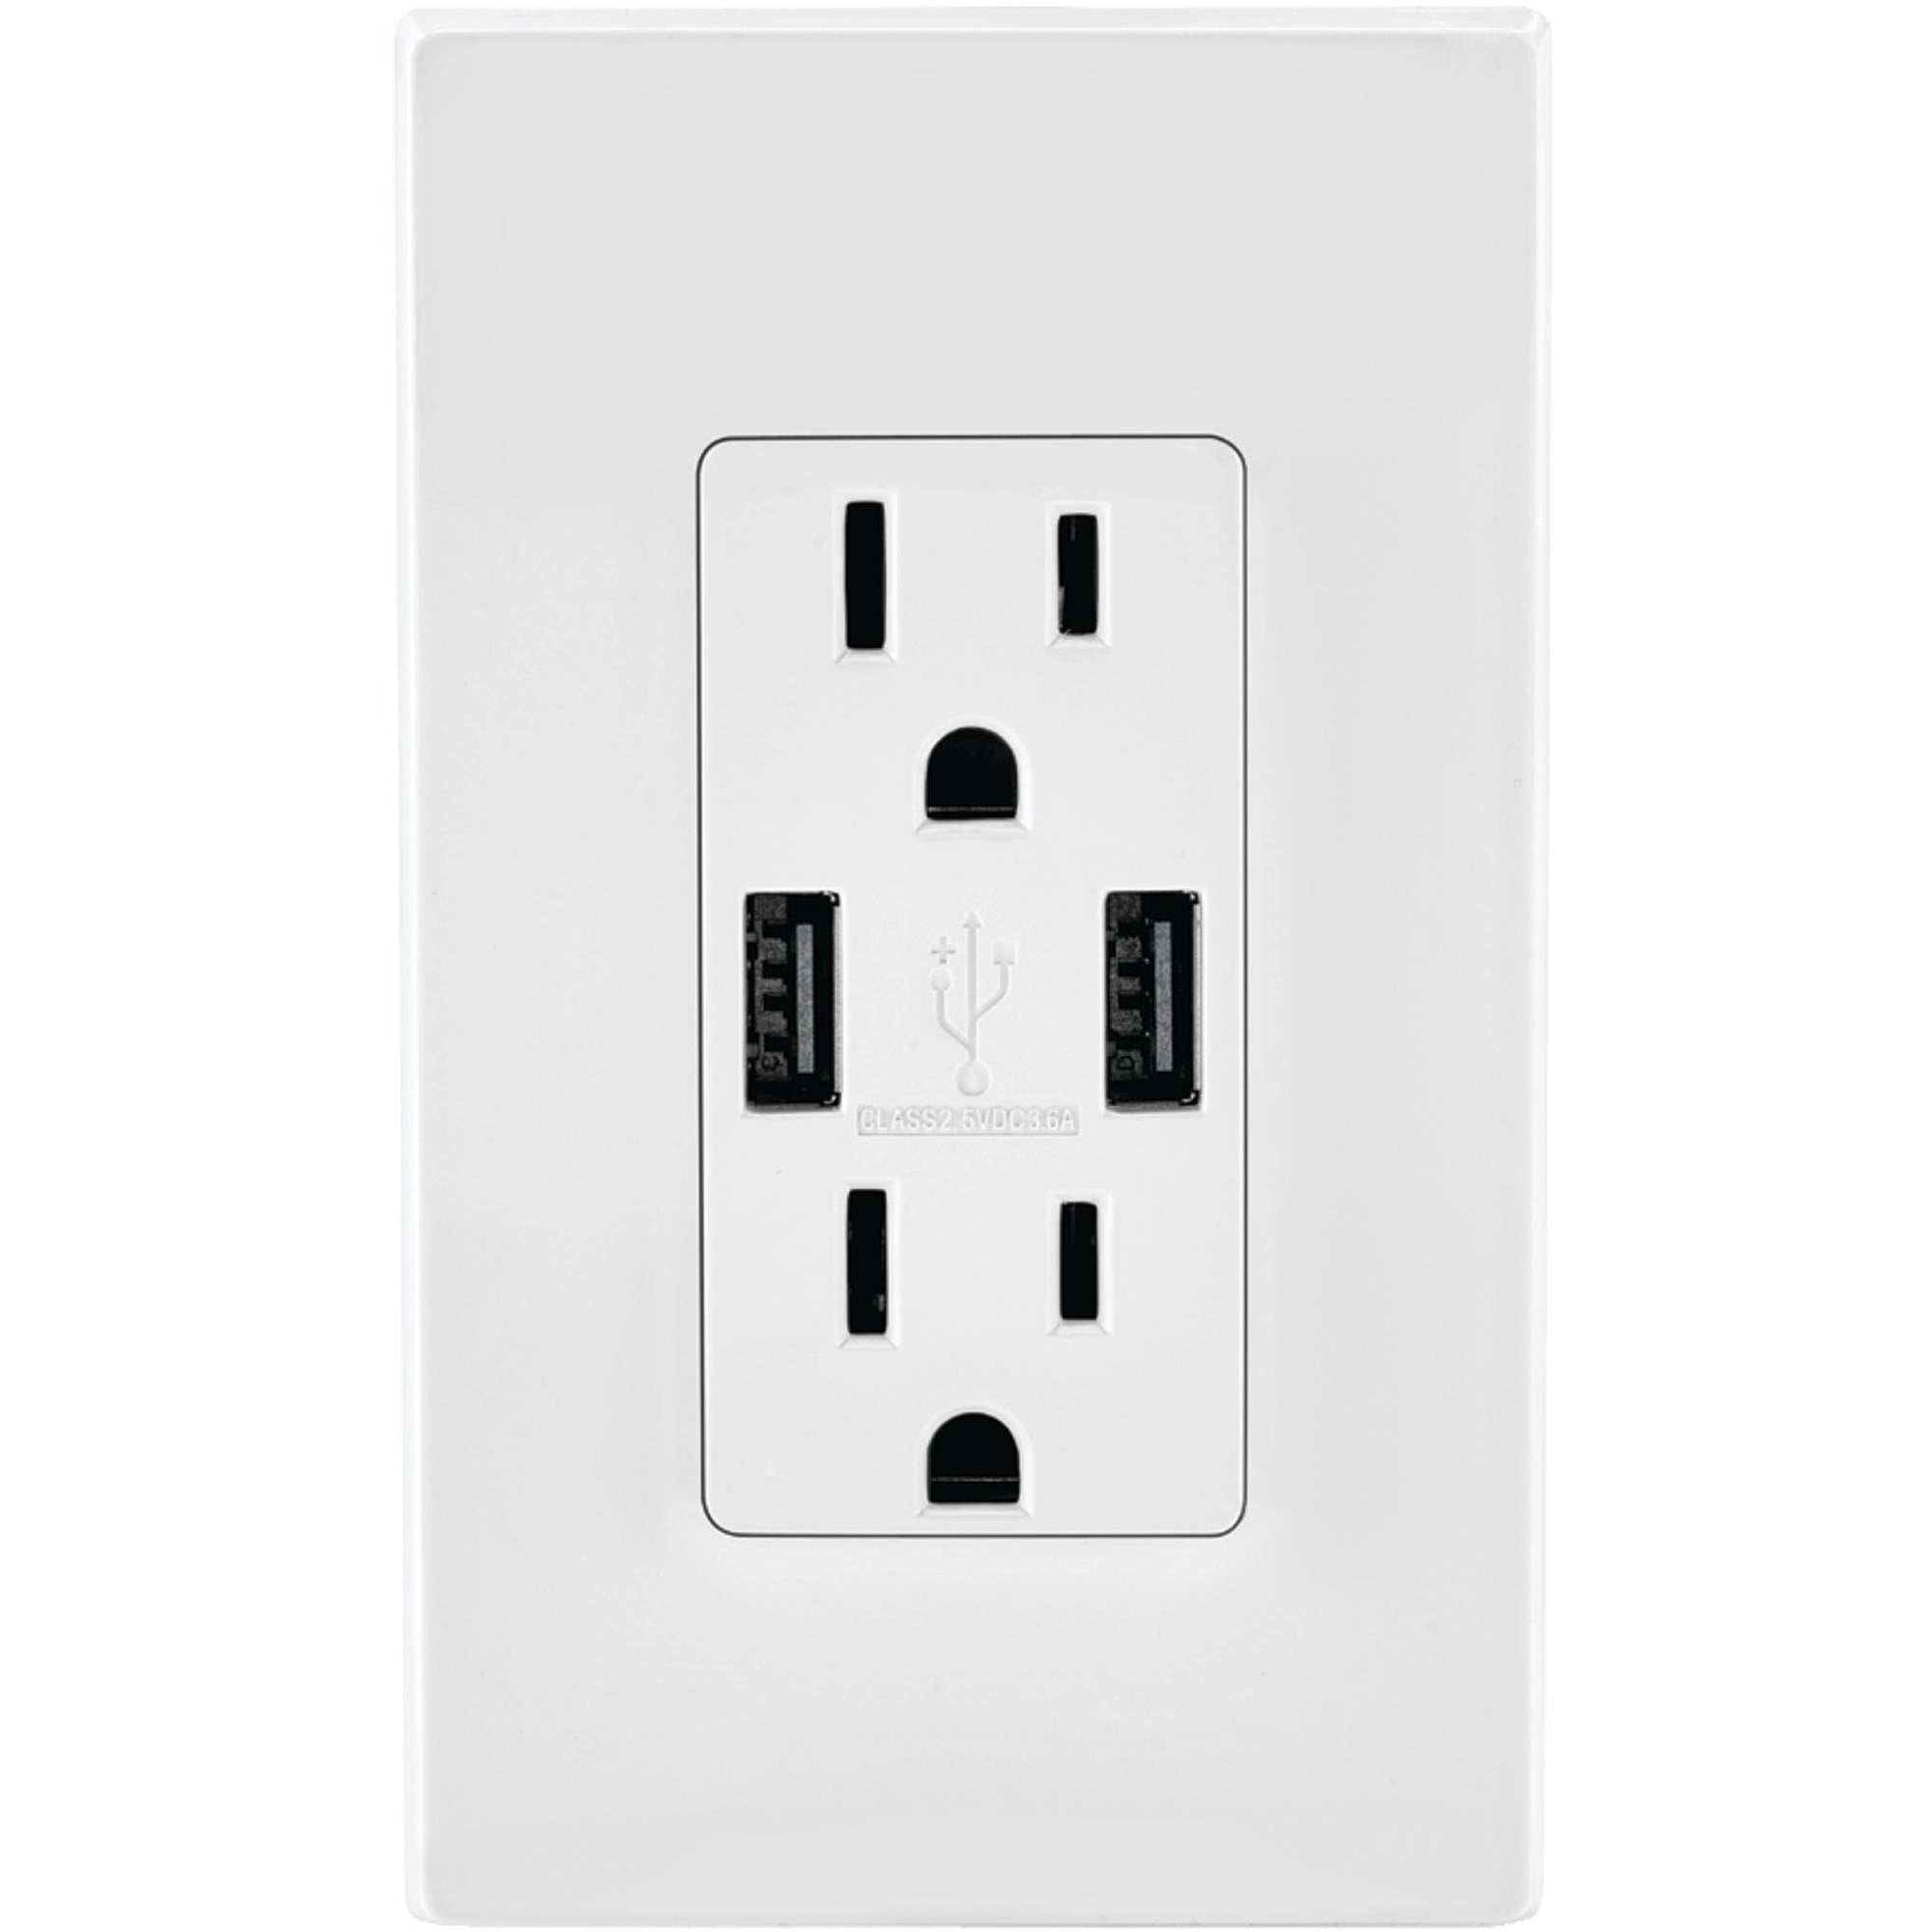 Leviton T5632-W Combo Duplex Receptacle and 15A USB Charger, White - www.semadata.org